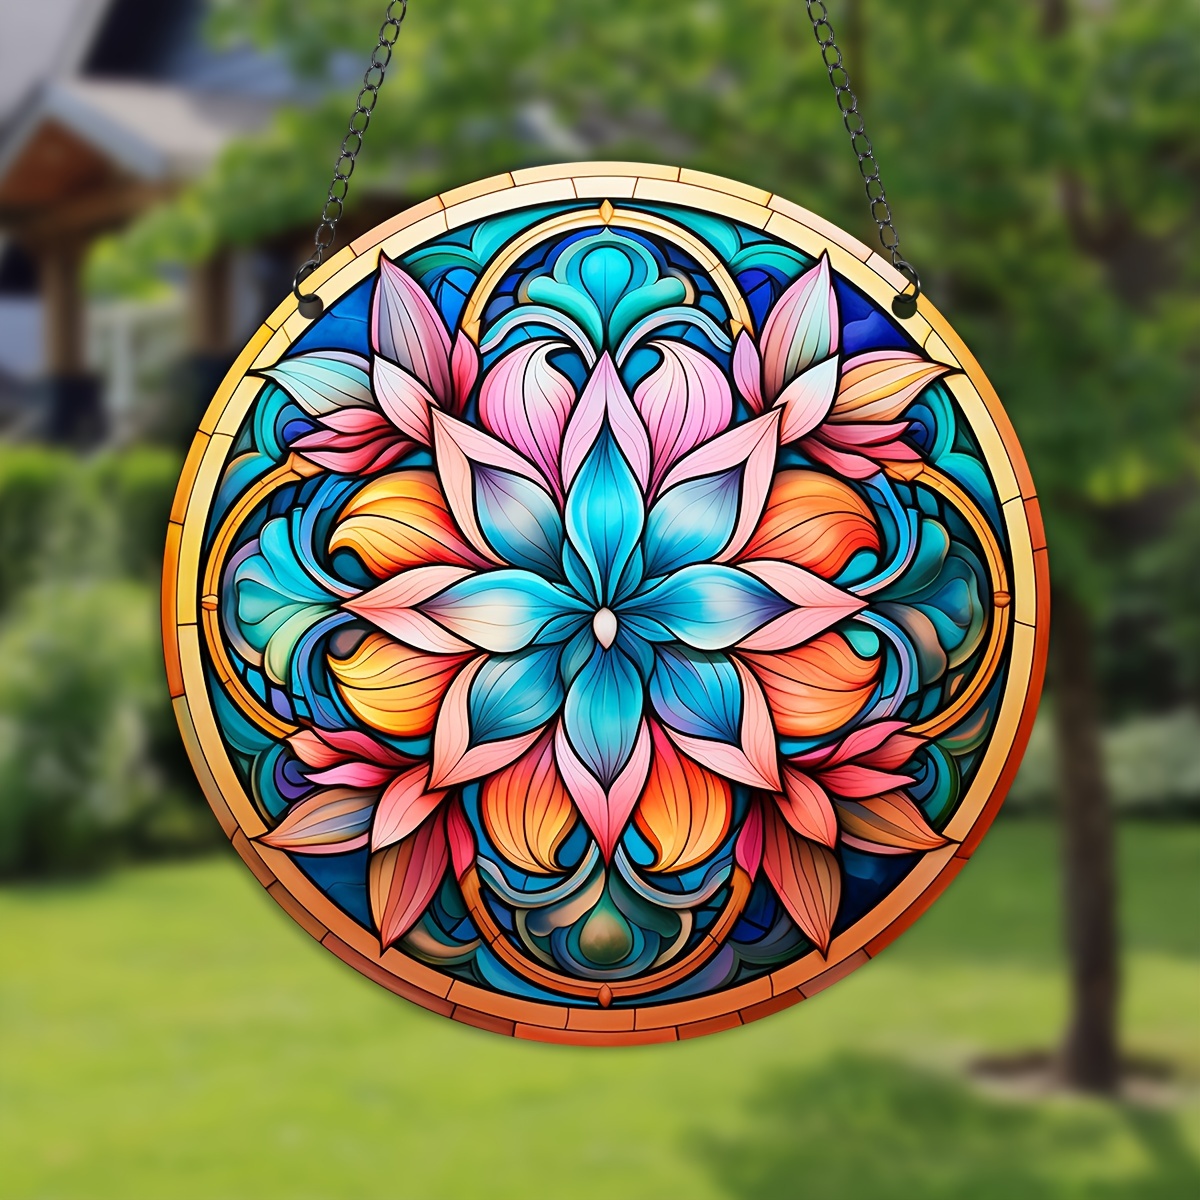  Insnug Color Your Own Mandala Window Cling, Arts and Crafts for  Kids Ages 8-12, Crafts for Teens Adult Elderly, Teen Girl Gifts Trendy Stuff,  Mandala Stained Glass Art Kit, Suncatcher Kits